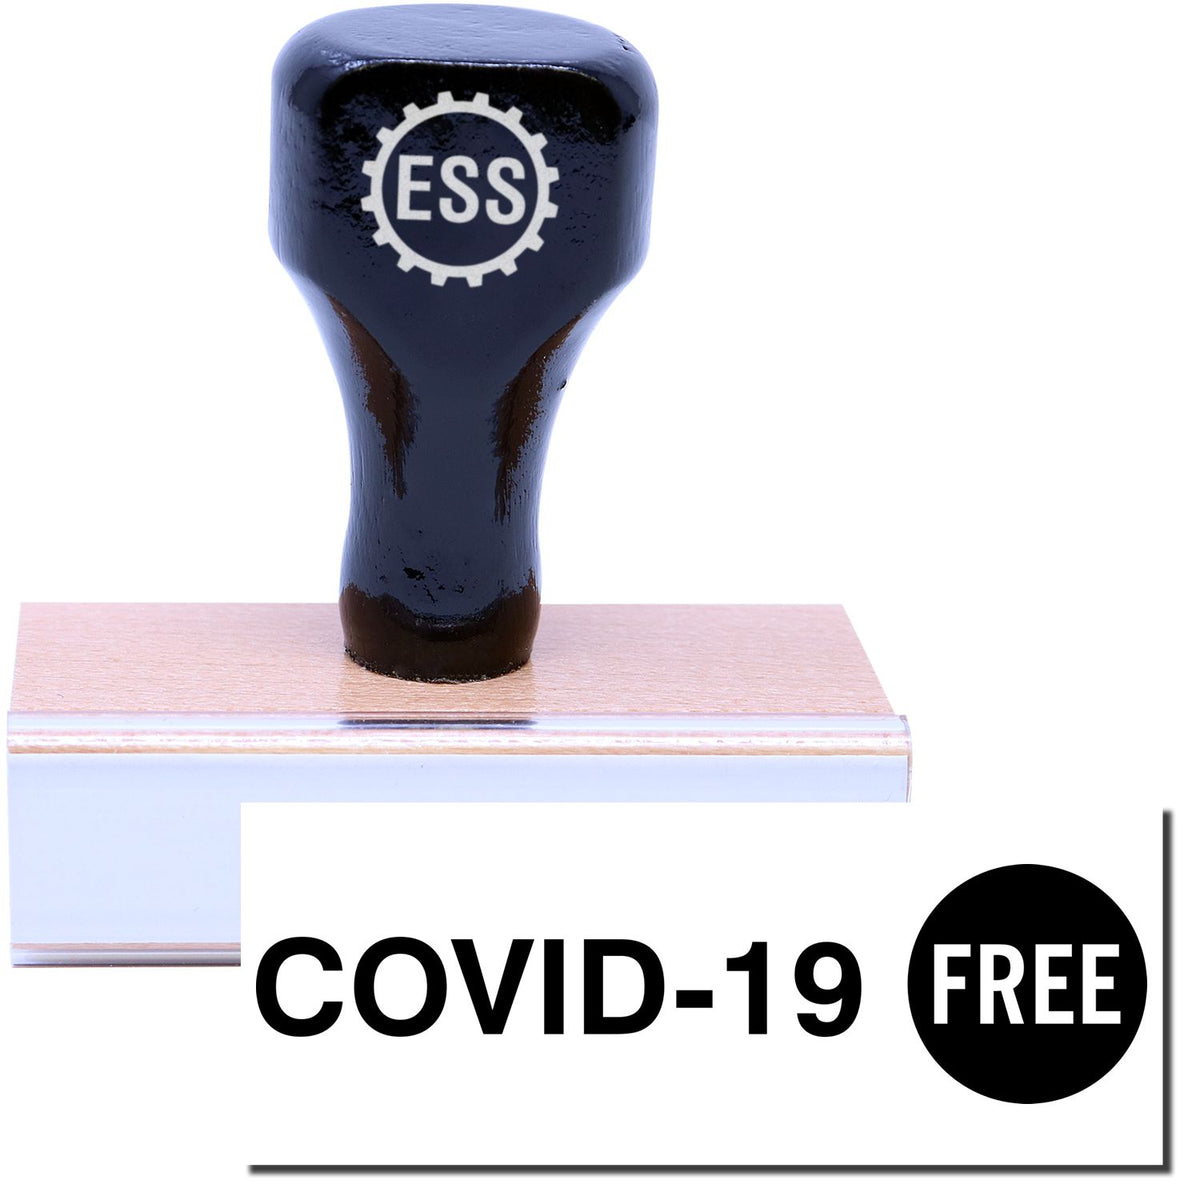 A stock office rubber stamp with a stamped image showing how the text &quot;COVID-19&quot; in a large bright bold font with a &quot;FREE&quot; signboard on the right side is displayed after stamping.